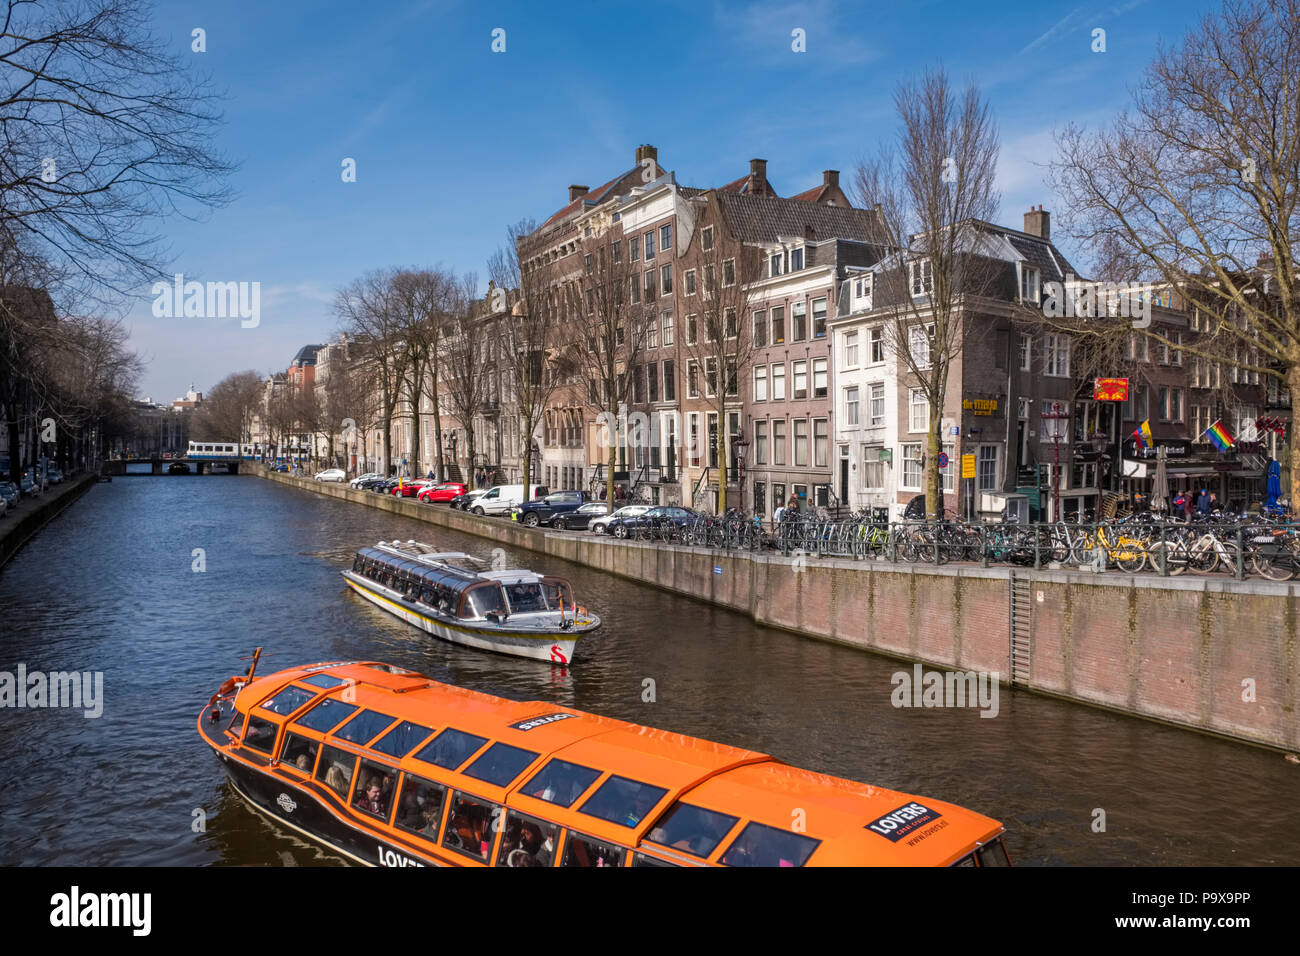 Thin canal houses and sightseeing boats on tourist cruises on a canal in Amsterdam, The Netherlands, Europe Stock Photo